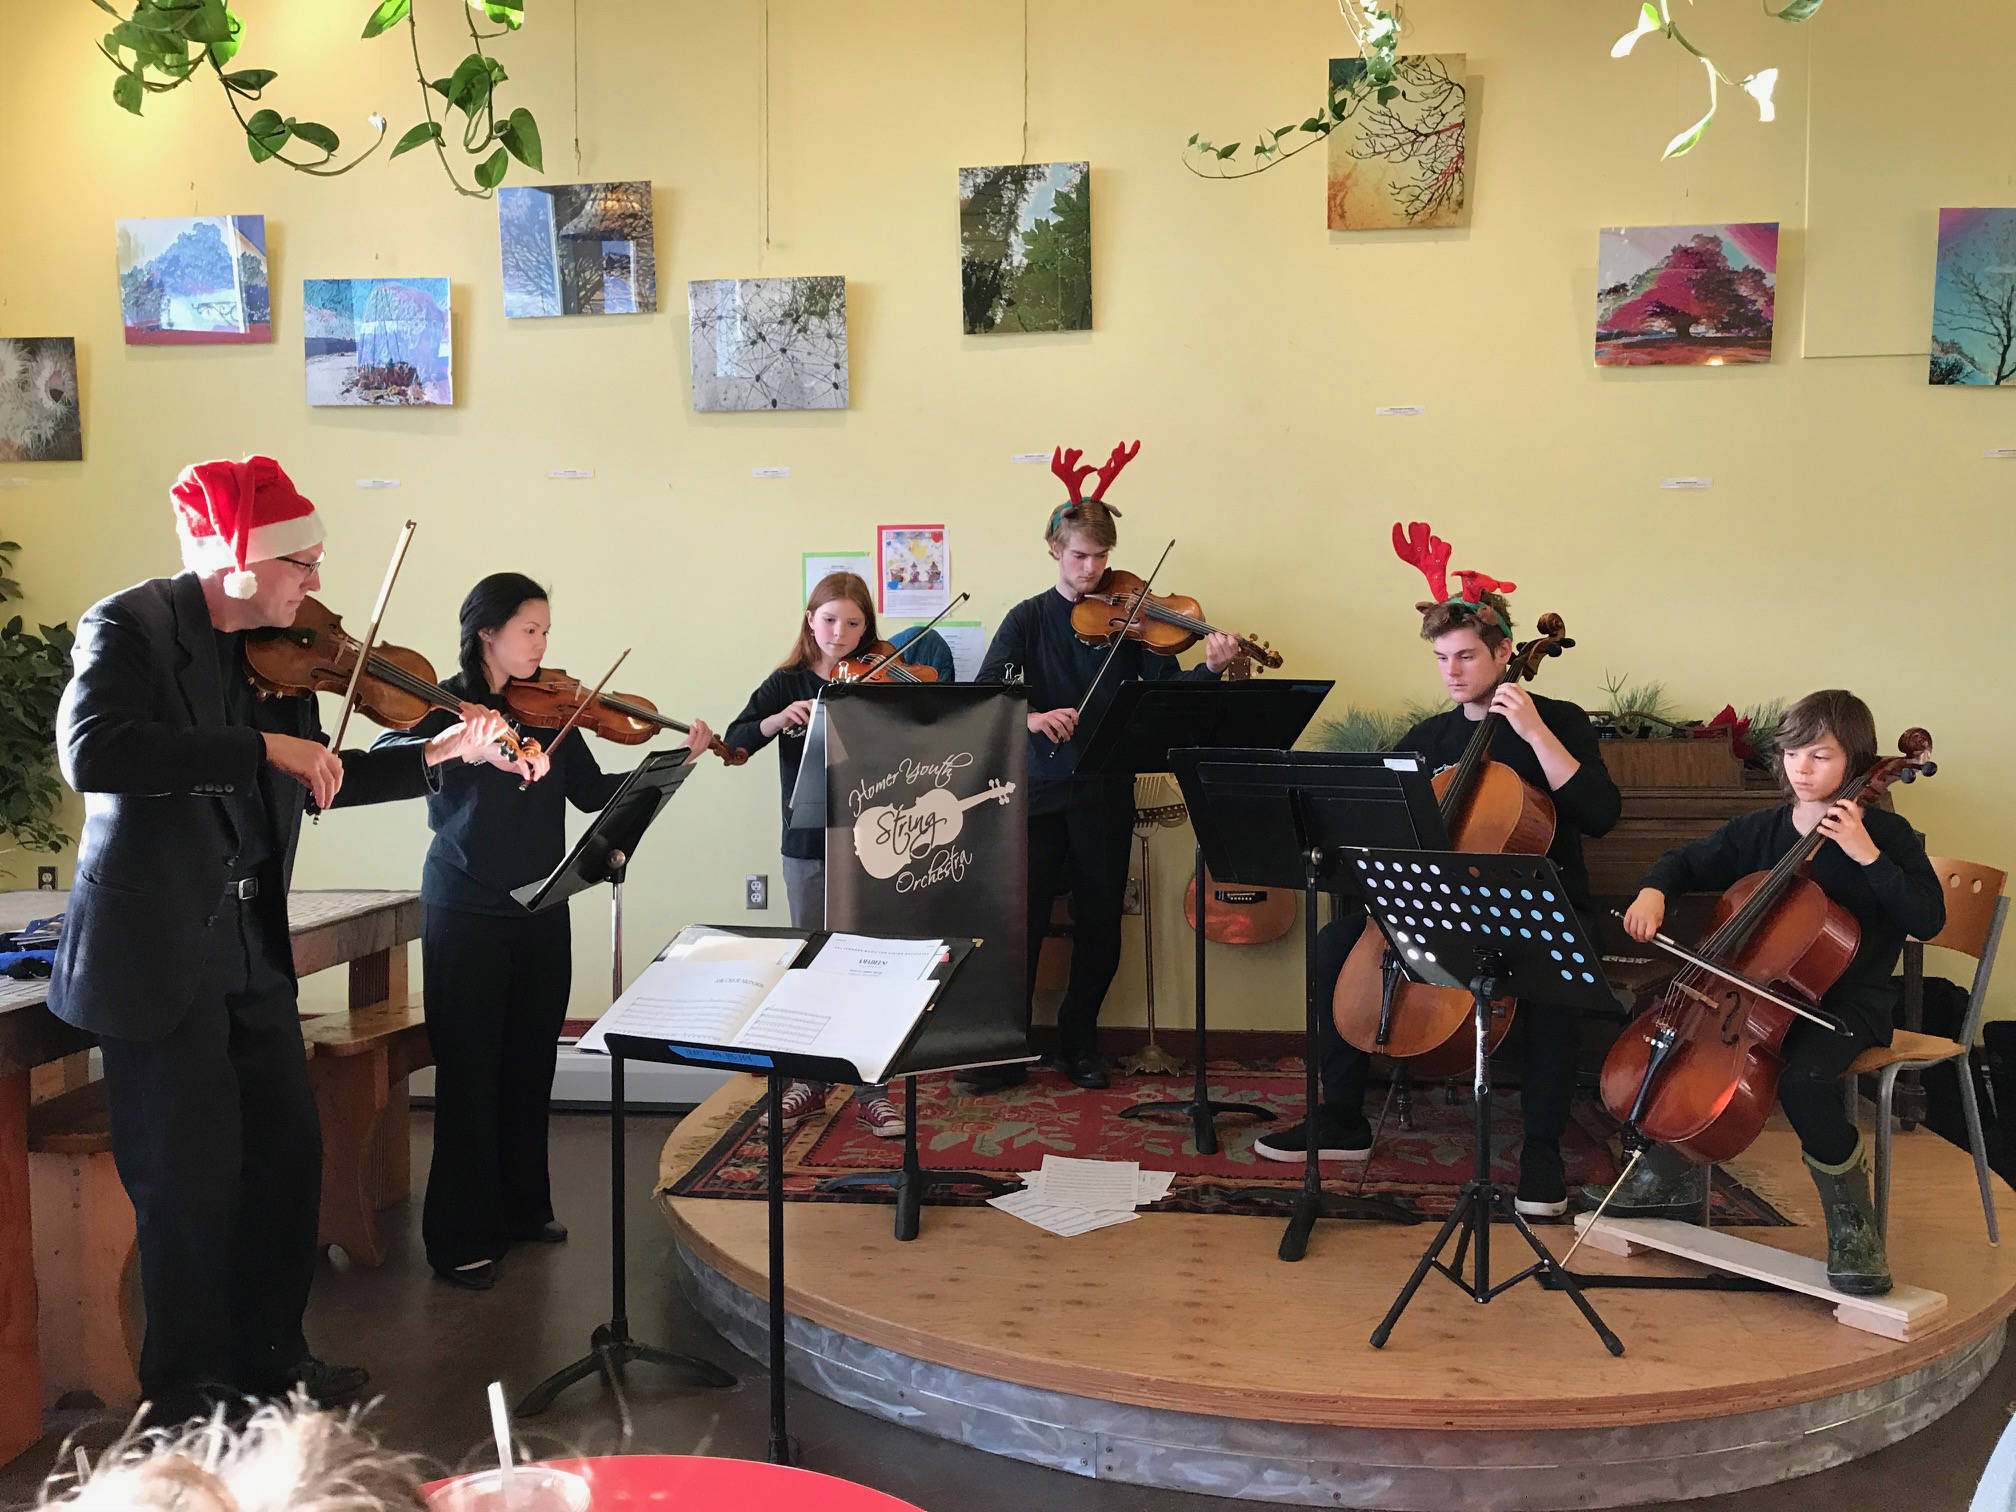 Members of the Homer Youth String Orchestra perform spread some holiday cheer at K-Bay Caffé on Saturday, Dec. 16, 2017 in Homer, Alaska. From left to right are Daniel Perry, Rosy Kauffman, Sylvia Clemens, Theodore Handley, Avram Salzmann and Clyde Clemens. (Photo provided)